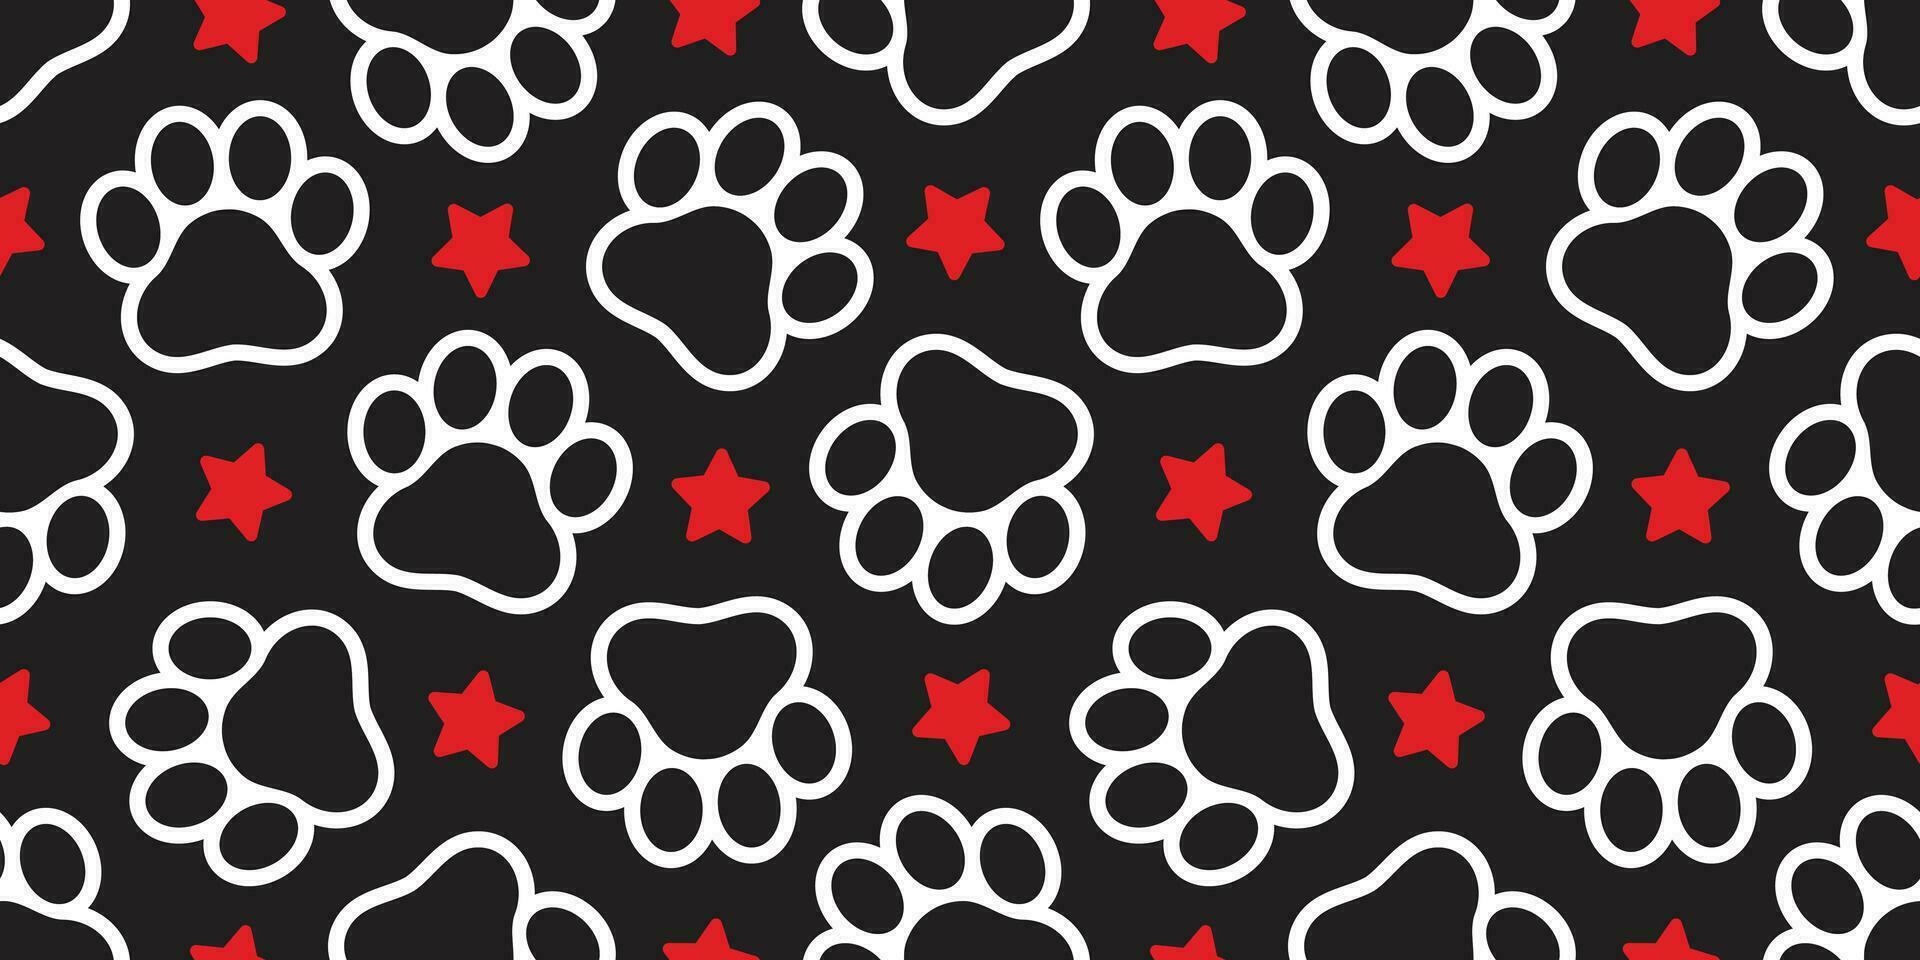 Dog Paw seamless pattern vector star footprint pet cat scarf isolated repeat wallpaper cartoon tile background design black